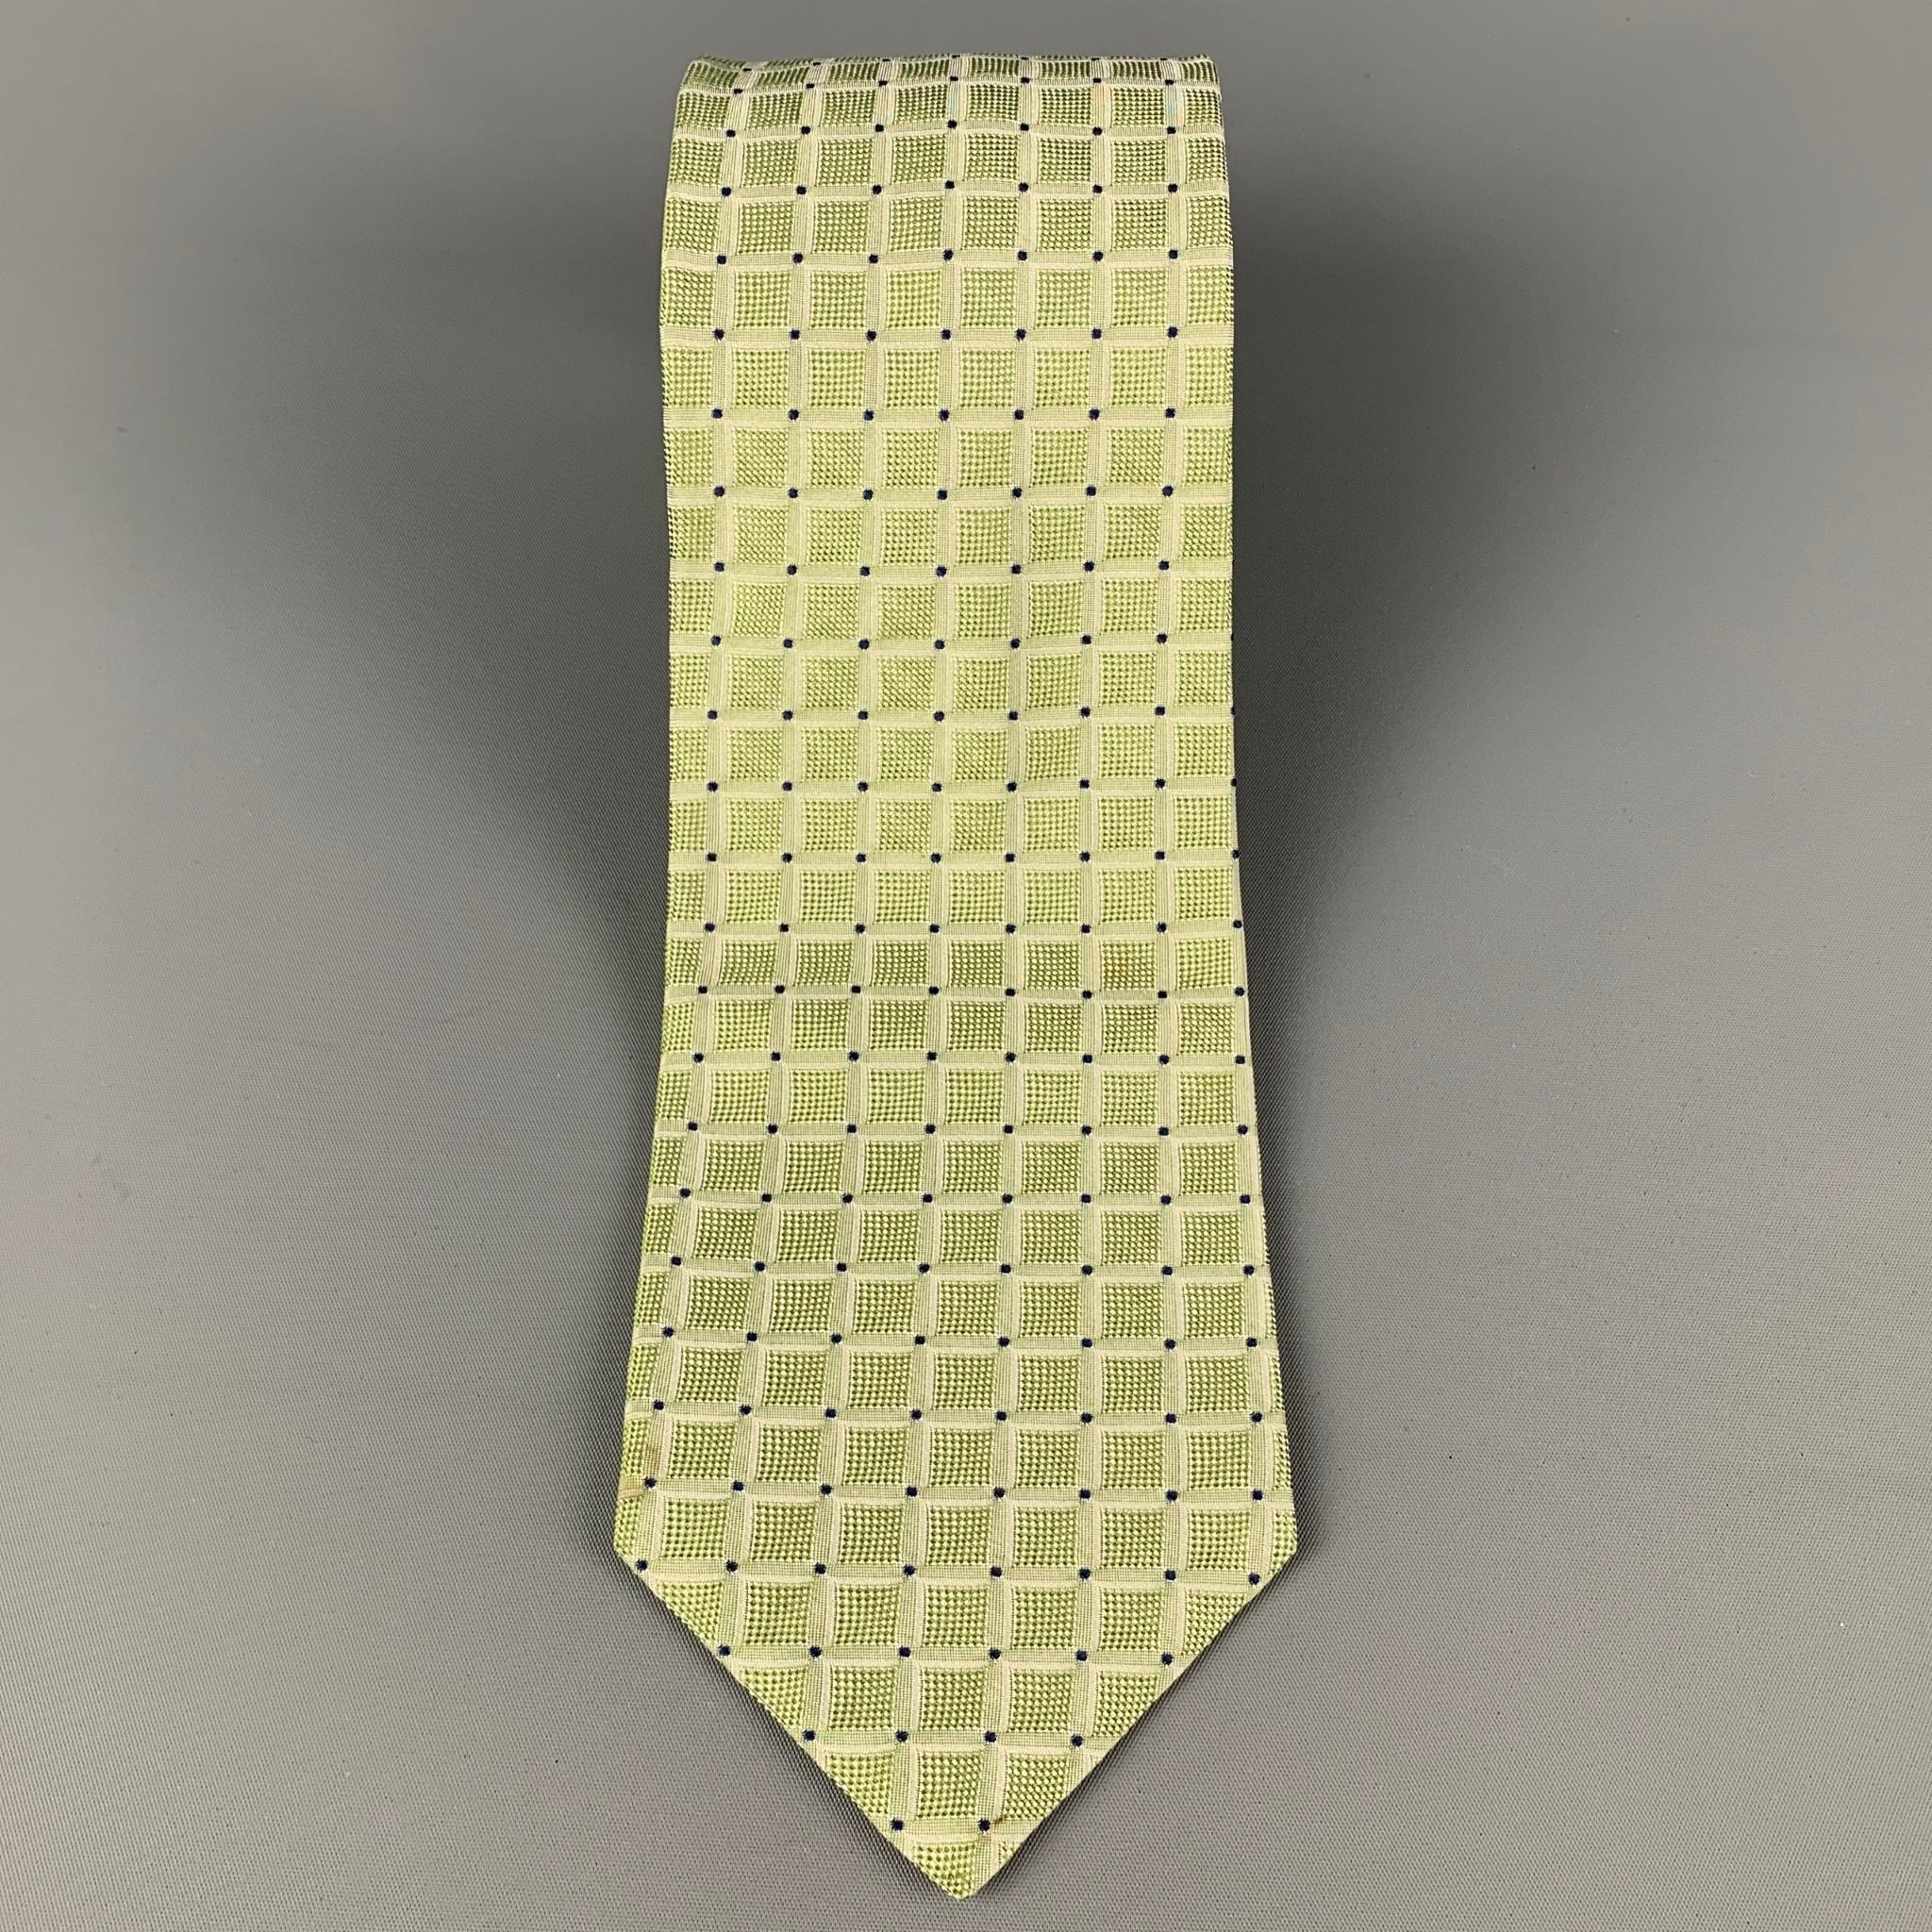 KITON necktie comes in a sage silk with a all over square print. Made in Italy.

Very Good Pre-Owned Condition.
Original Retail Price: $345.00

Width: 3.75 in.
Length: 58 in. 